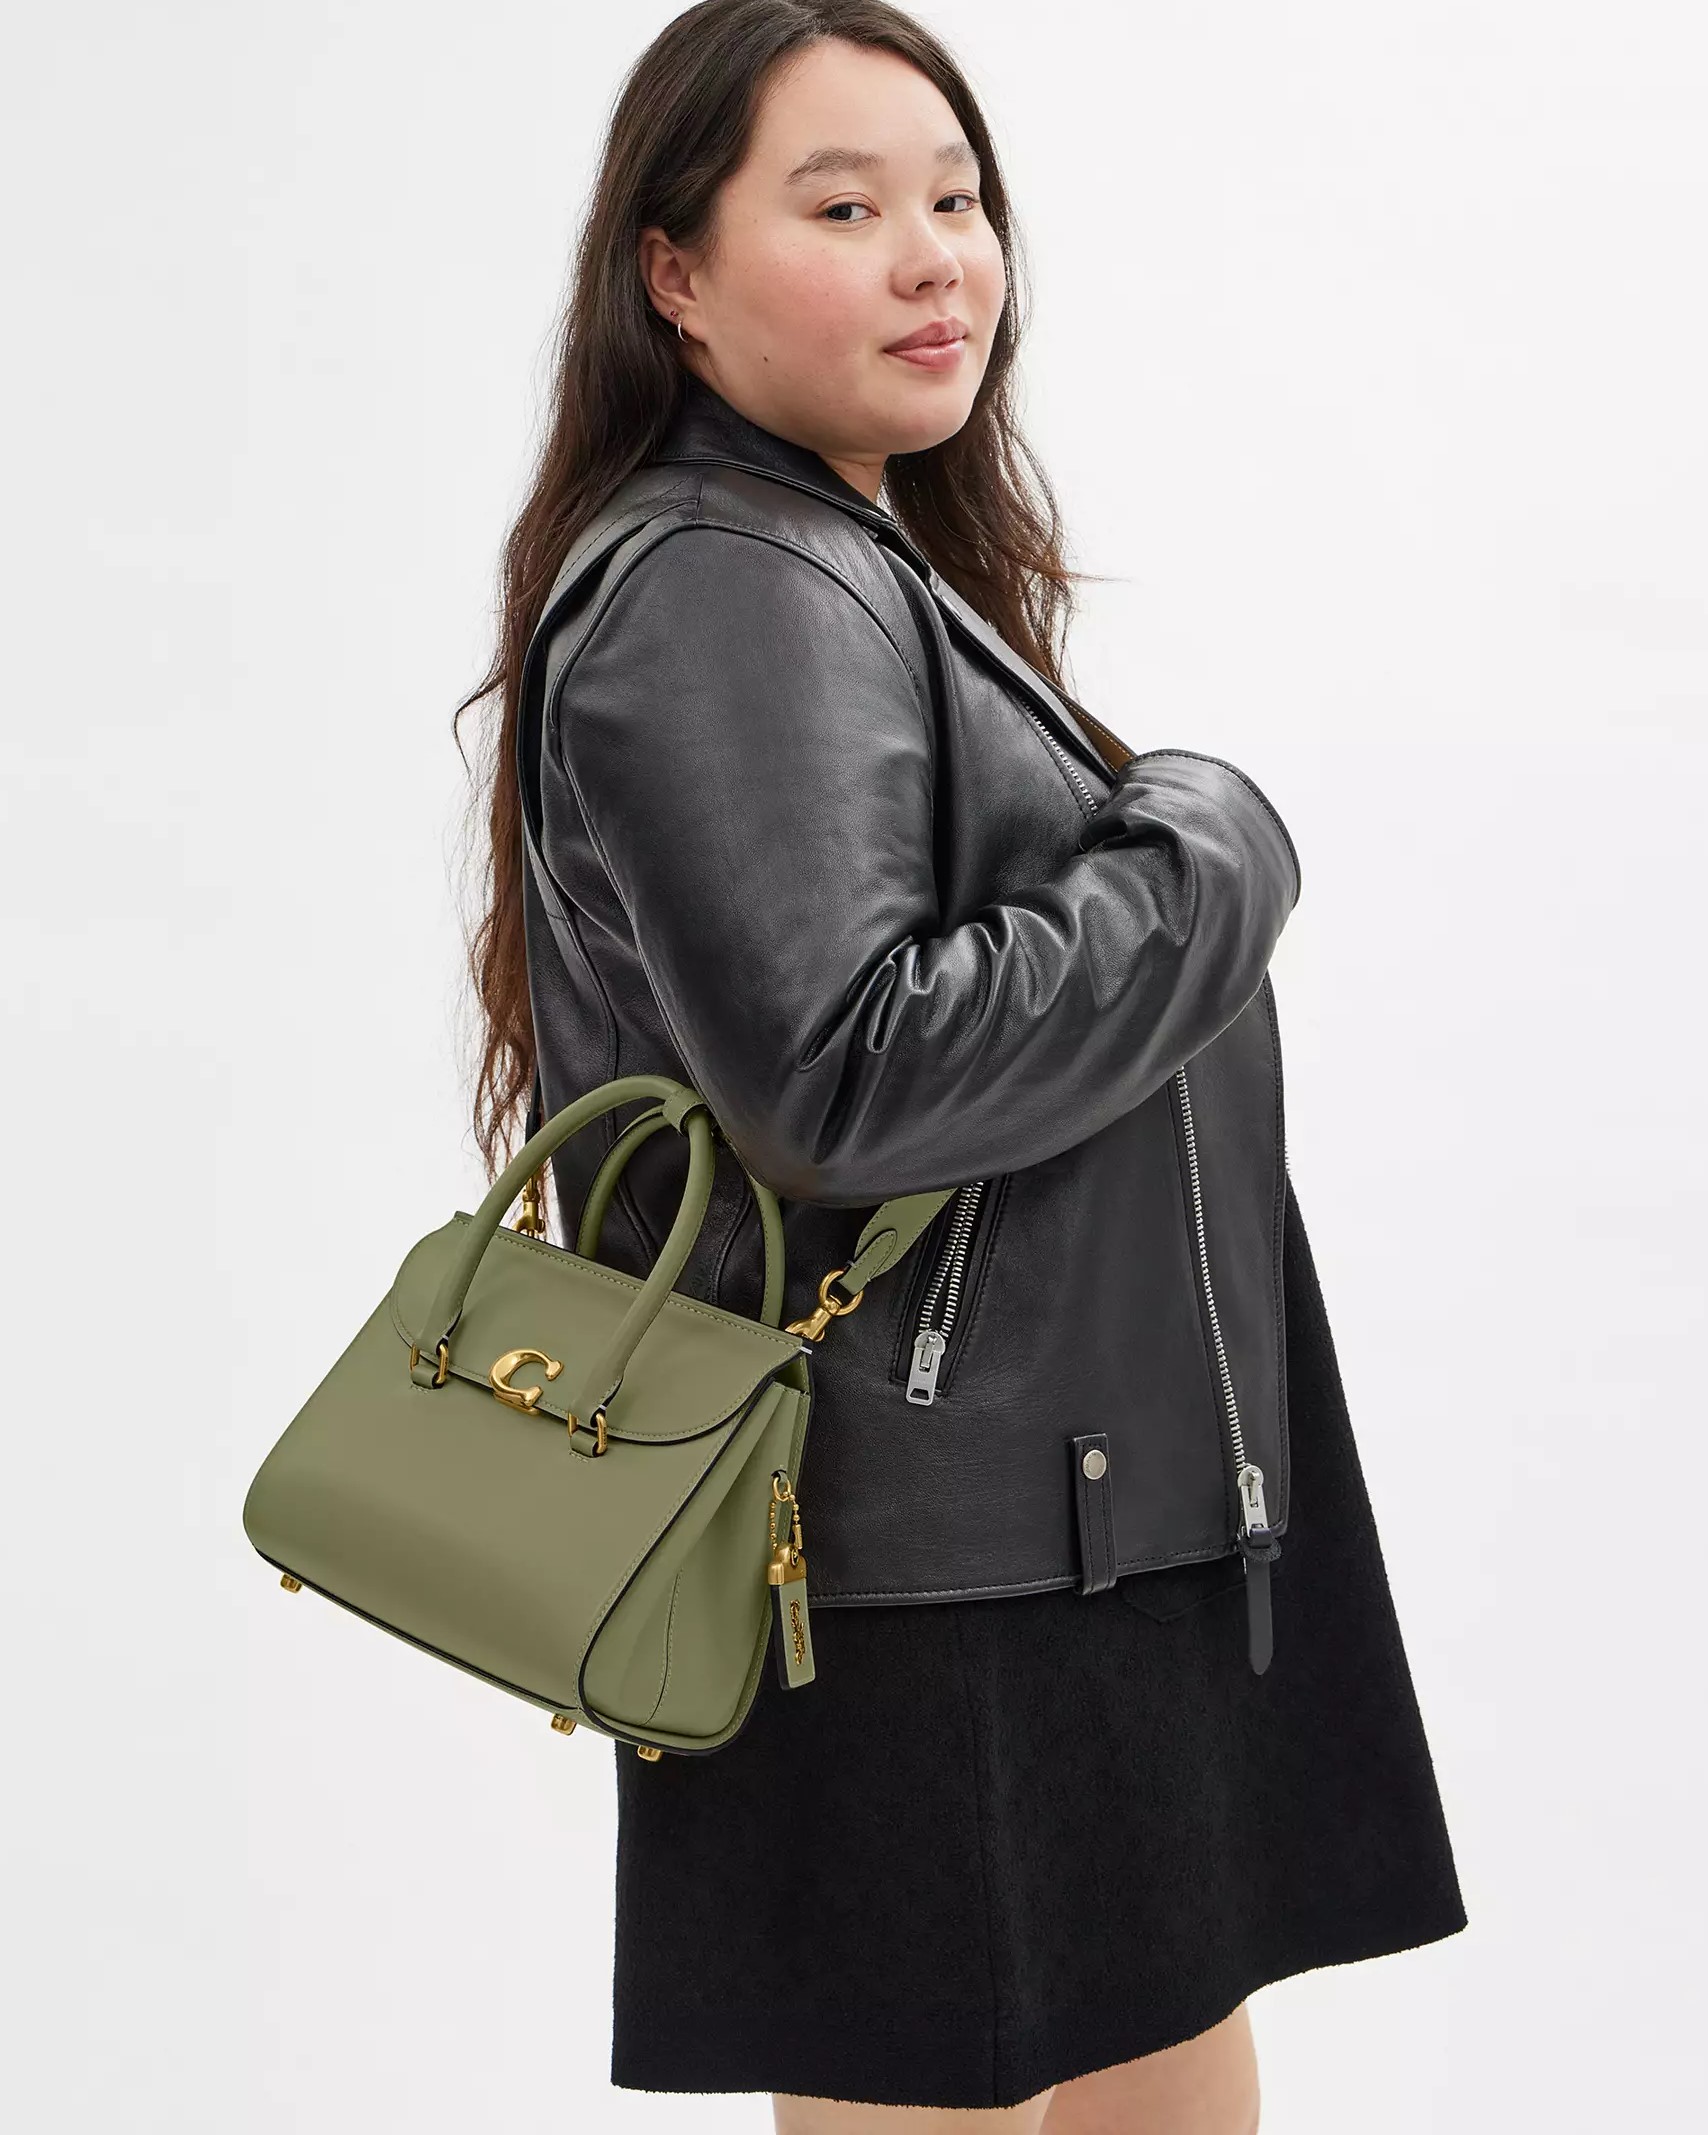 TÚI XÁCH COACH NỮ BROOME CARRYALL LUXE REFINED CALF LEATHER BRASS MOSS CP119 4